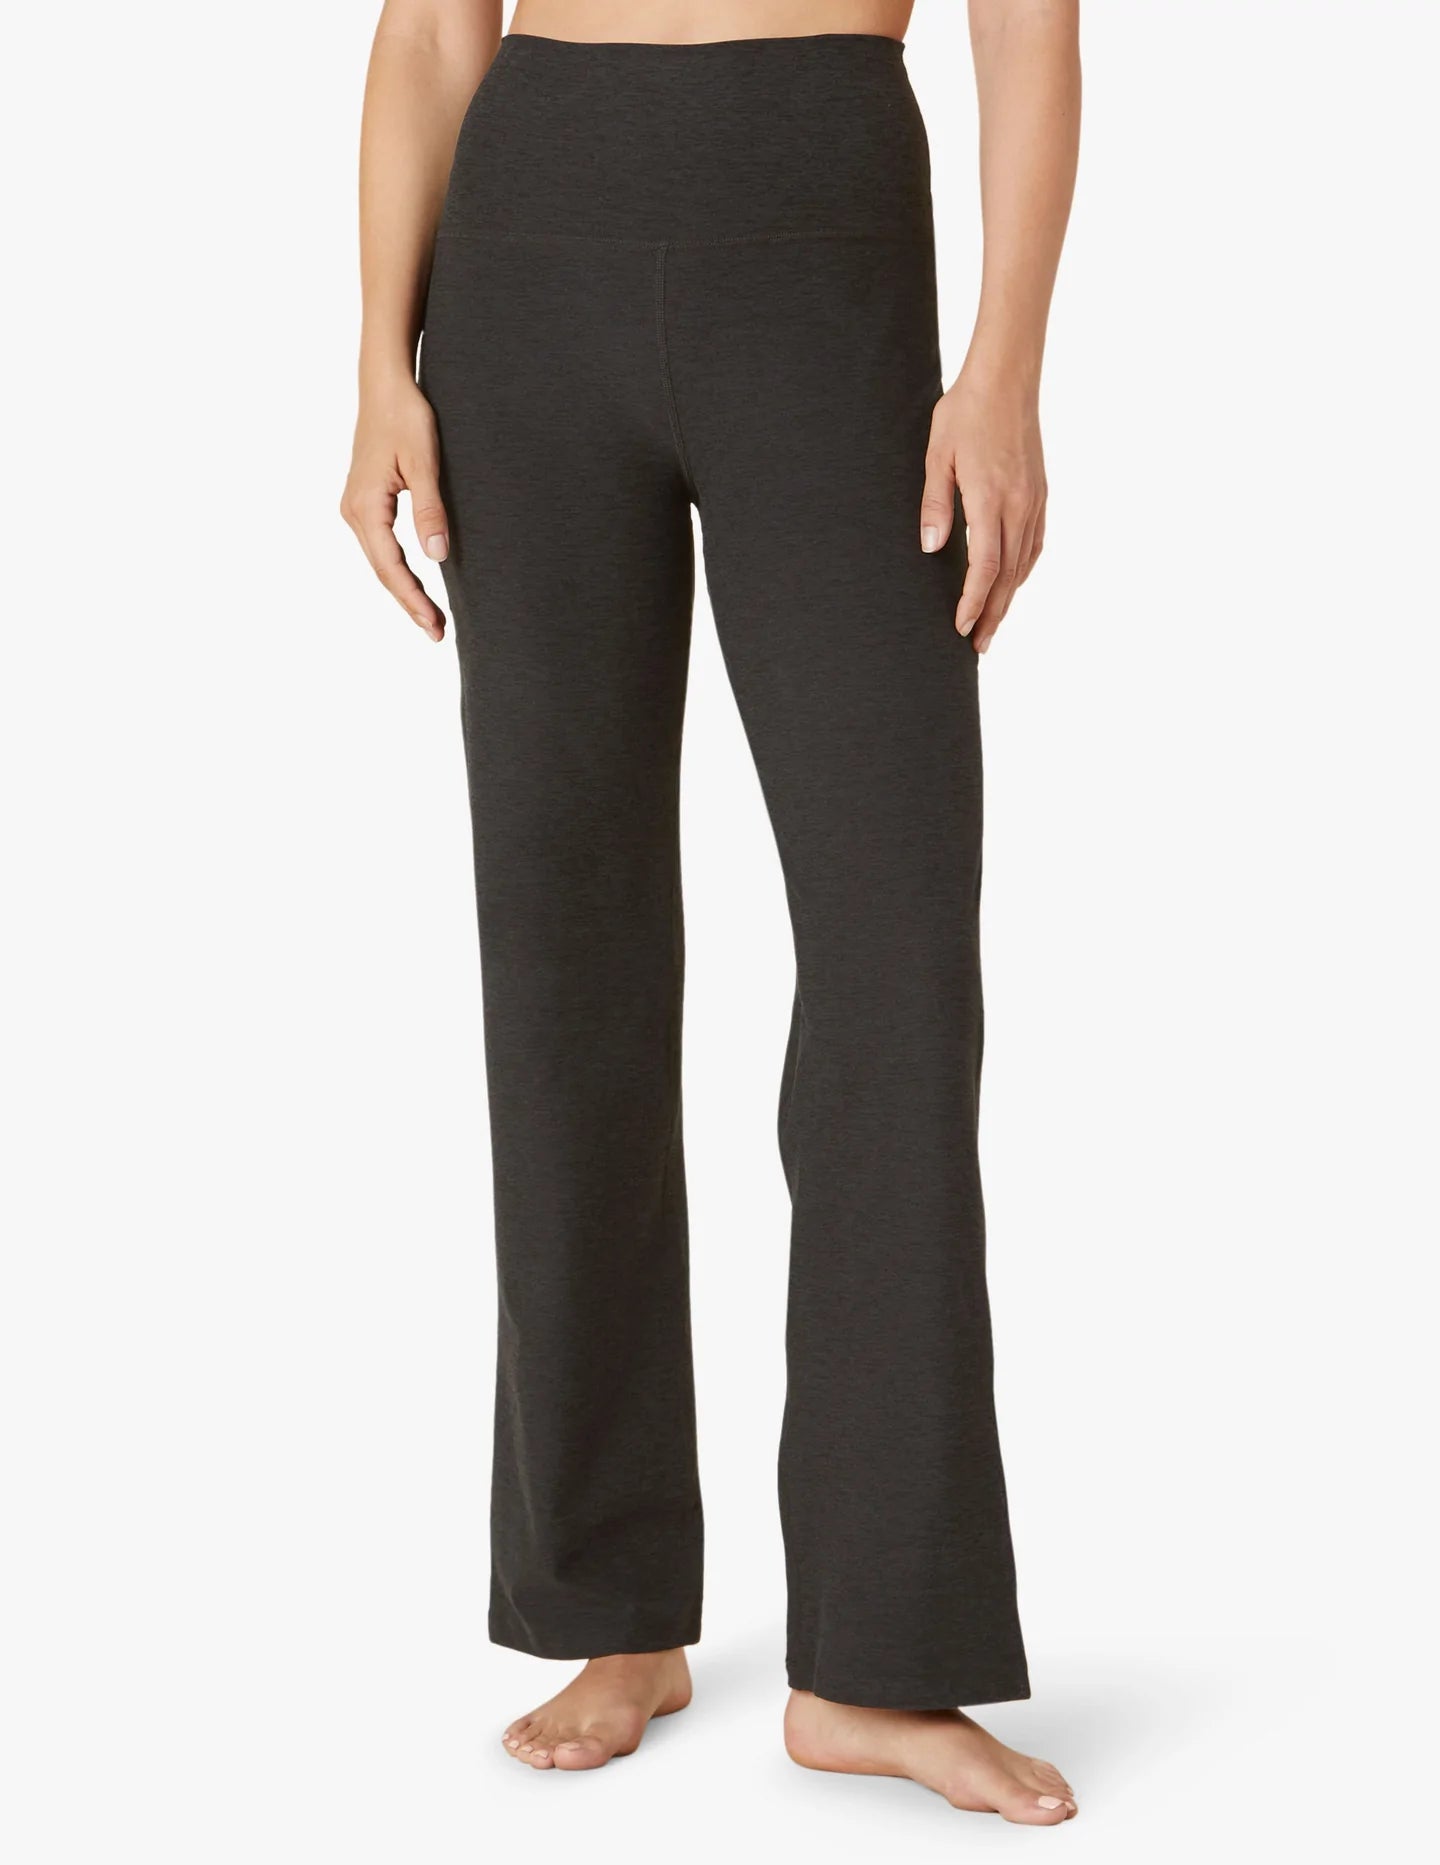 RQYYD Reduced Bootcut Yoga Wide Leg Pants with Pockets for Women